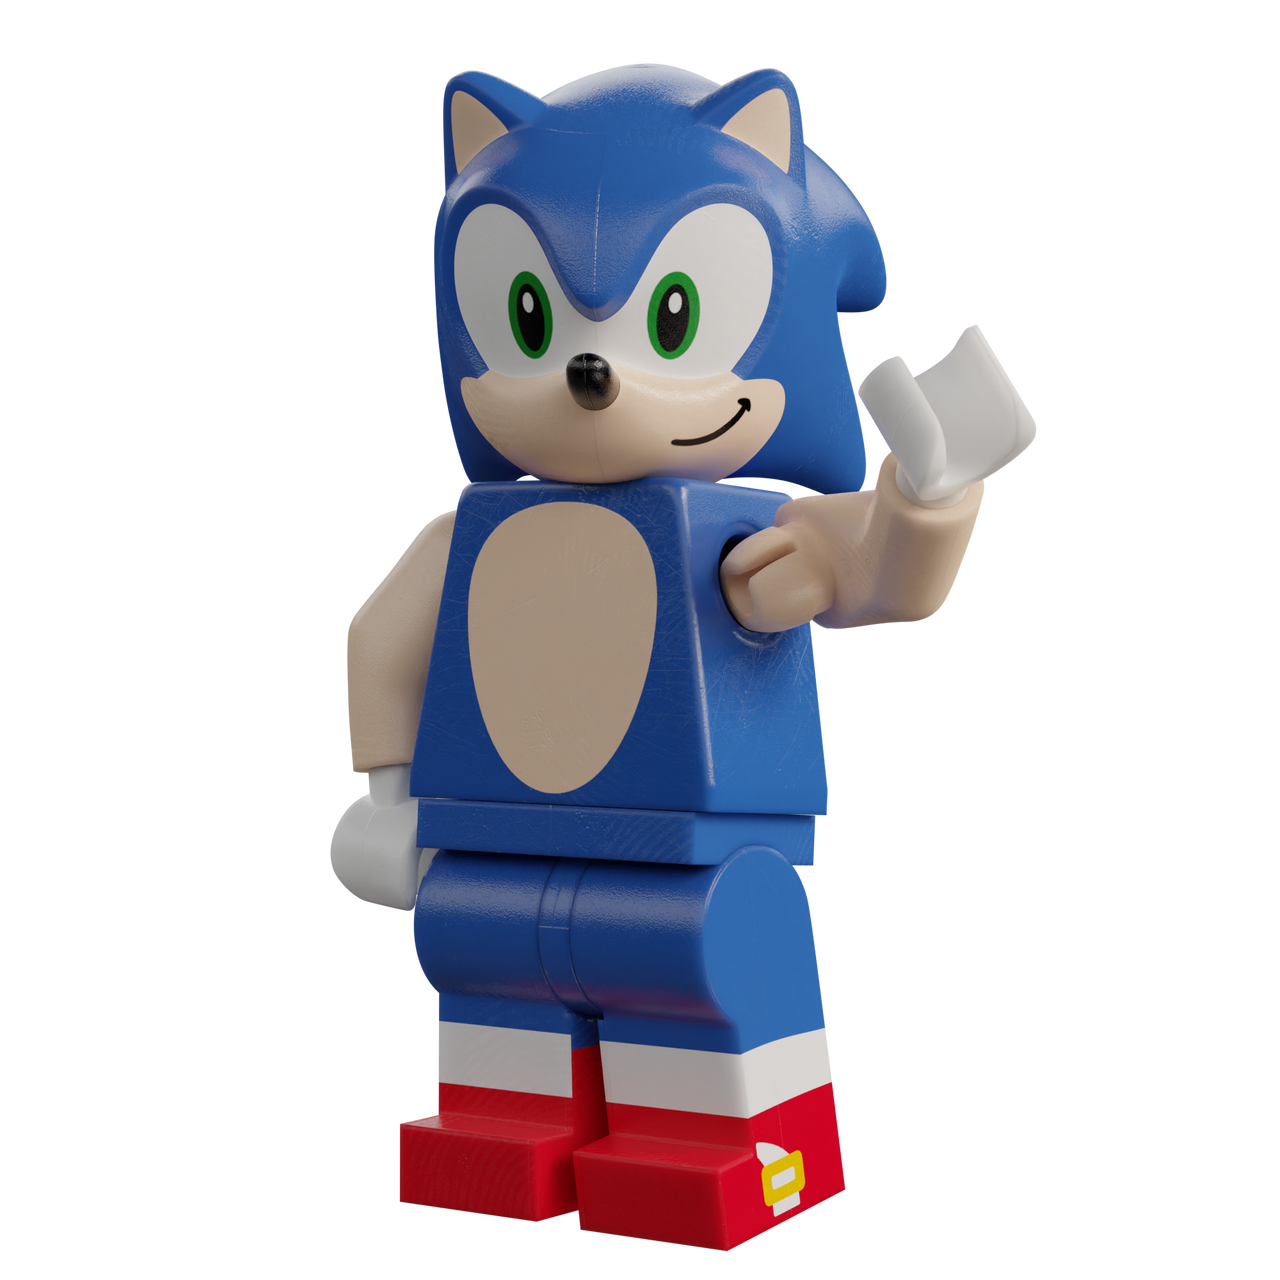 Lego Classic Sonic by Nibroc-Rock on DeviantArt